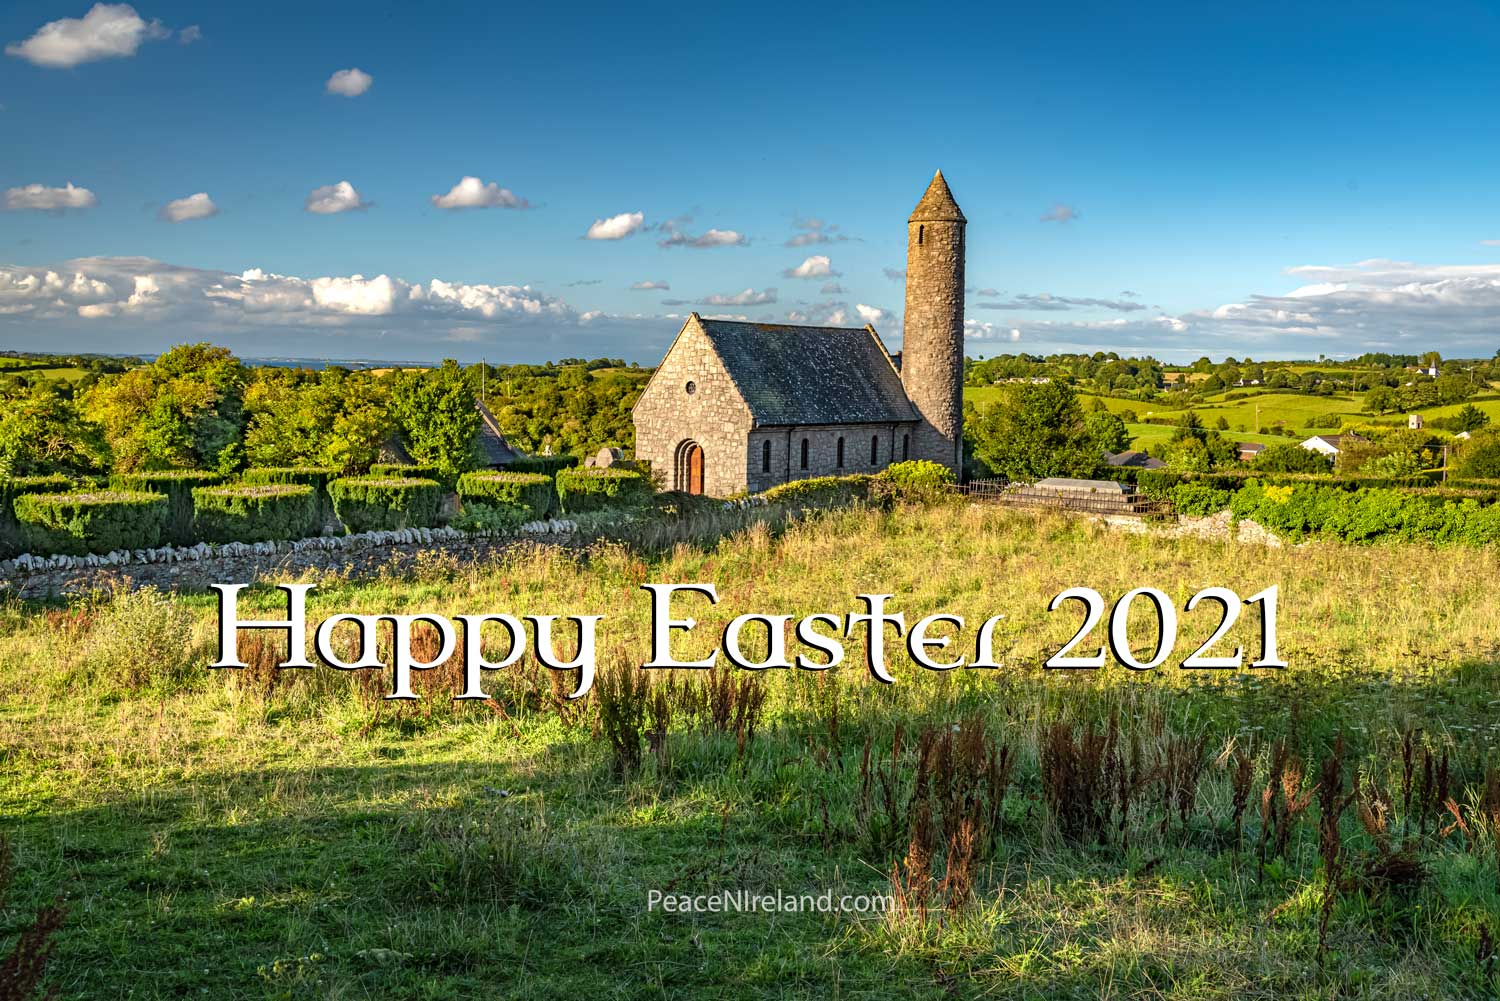 A Very Happy Easter to people of goodwill everywhere. The photo above shows the site of the very first Christian church in Ireland, founded by St Patrick in 432AD, making this the oldest ecclesiastical site in Ireland. It's located at Saul, County Down, in Northern Ireland, just a few miles from where St Patrick's remains are buried at Down Church of Ireland Cathedral, Downpatrick.